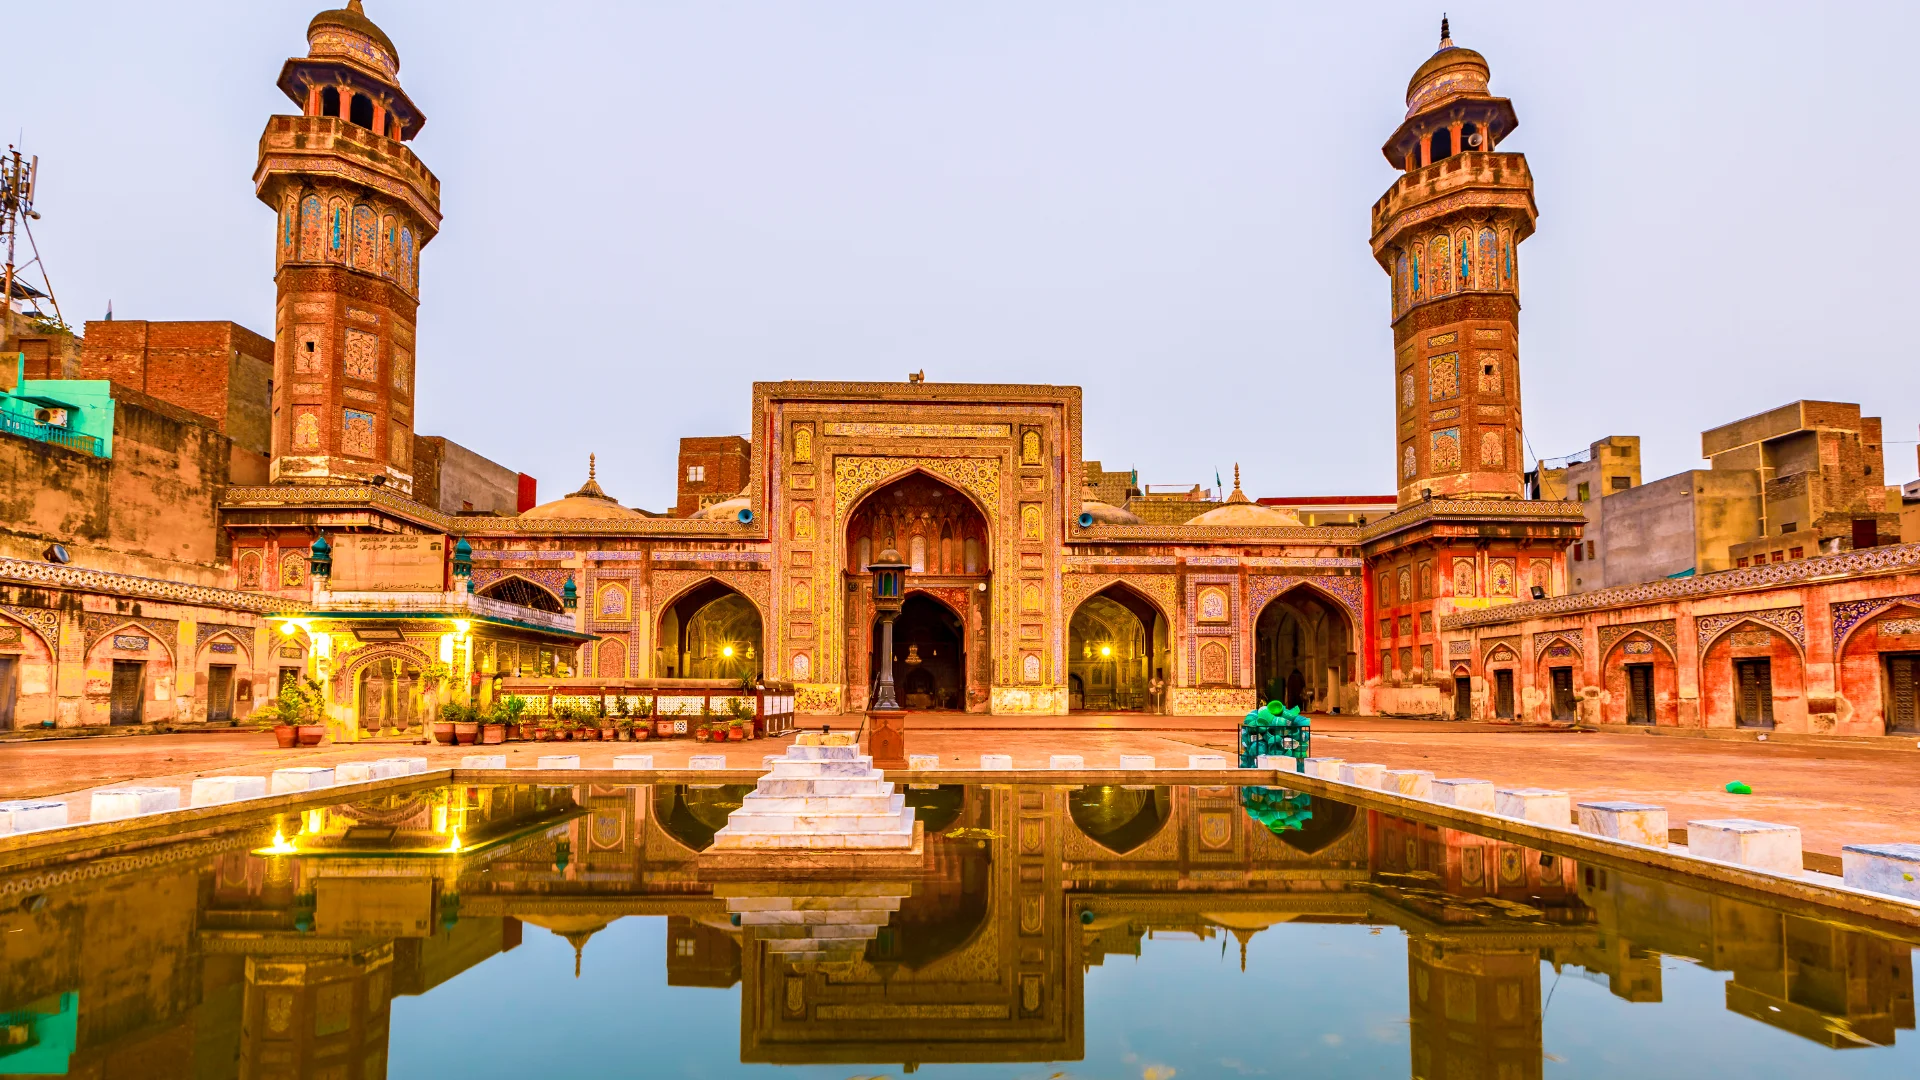 Front view of the Wazir Khan Mosque in Lahore, Pakistan, showcasing its intricate architecture and vibrant colors.